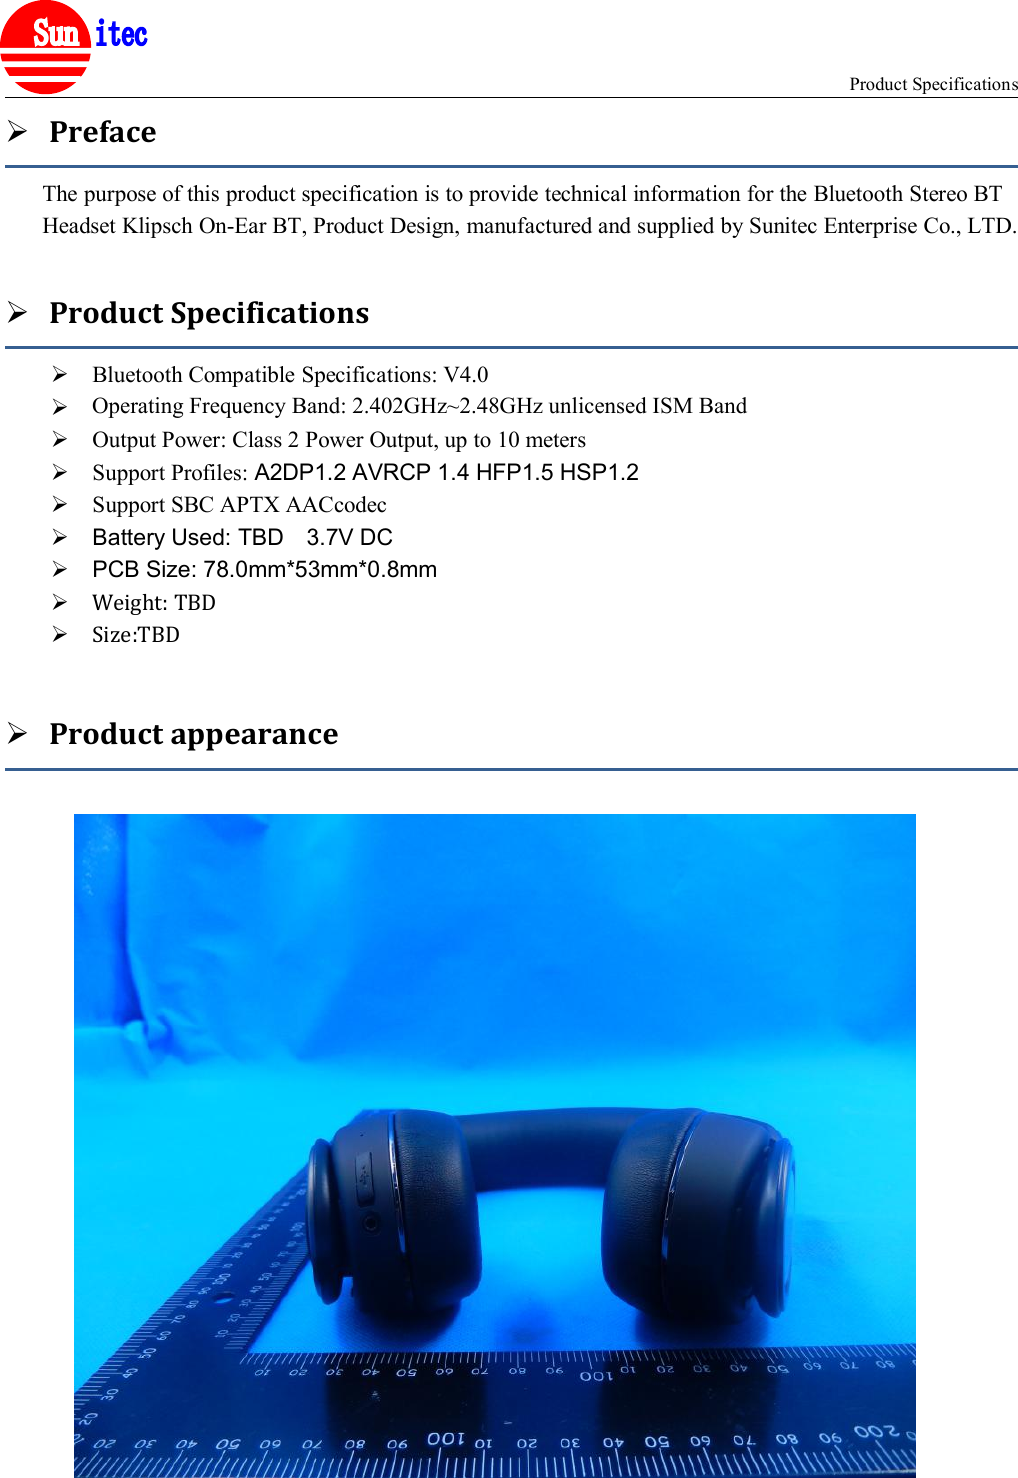 Product Specifications®PrefaceThe purpose of this product specification is to provide technical information for the Bluetooth Stereo BTHeadset Klipsch On-Ear BT, Product Design, manufactured and supplied by Sunitec Enterprise Co., LTD.Product SpecificationsBluetooth Compatible Specifications: V4.0Operating Frequency Band: 2.4GHz~2.48GHz unlicensed ISM BandOutput Power: Class 2 Power Output, up to 10 metersSupport Profiles: A2DP1.2 AVRCP 1.4 HFP1.5 HSP1.2Support SBC APTX AACcodecBattery Used: TBD 3.7V DCPCB Size: 78.0mm*53mm*0.8mmWeight: TBDSize:TBDProduct appearanceOperating Frequency Band: 2.402GHz~2.48GHz unlicensed ISM Band